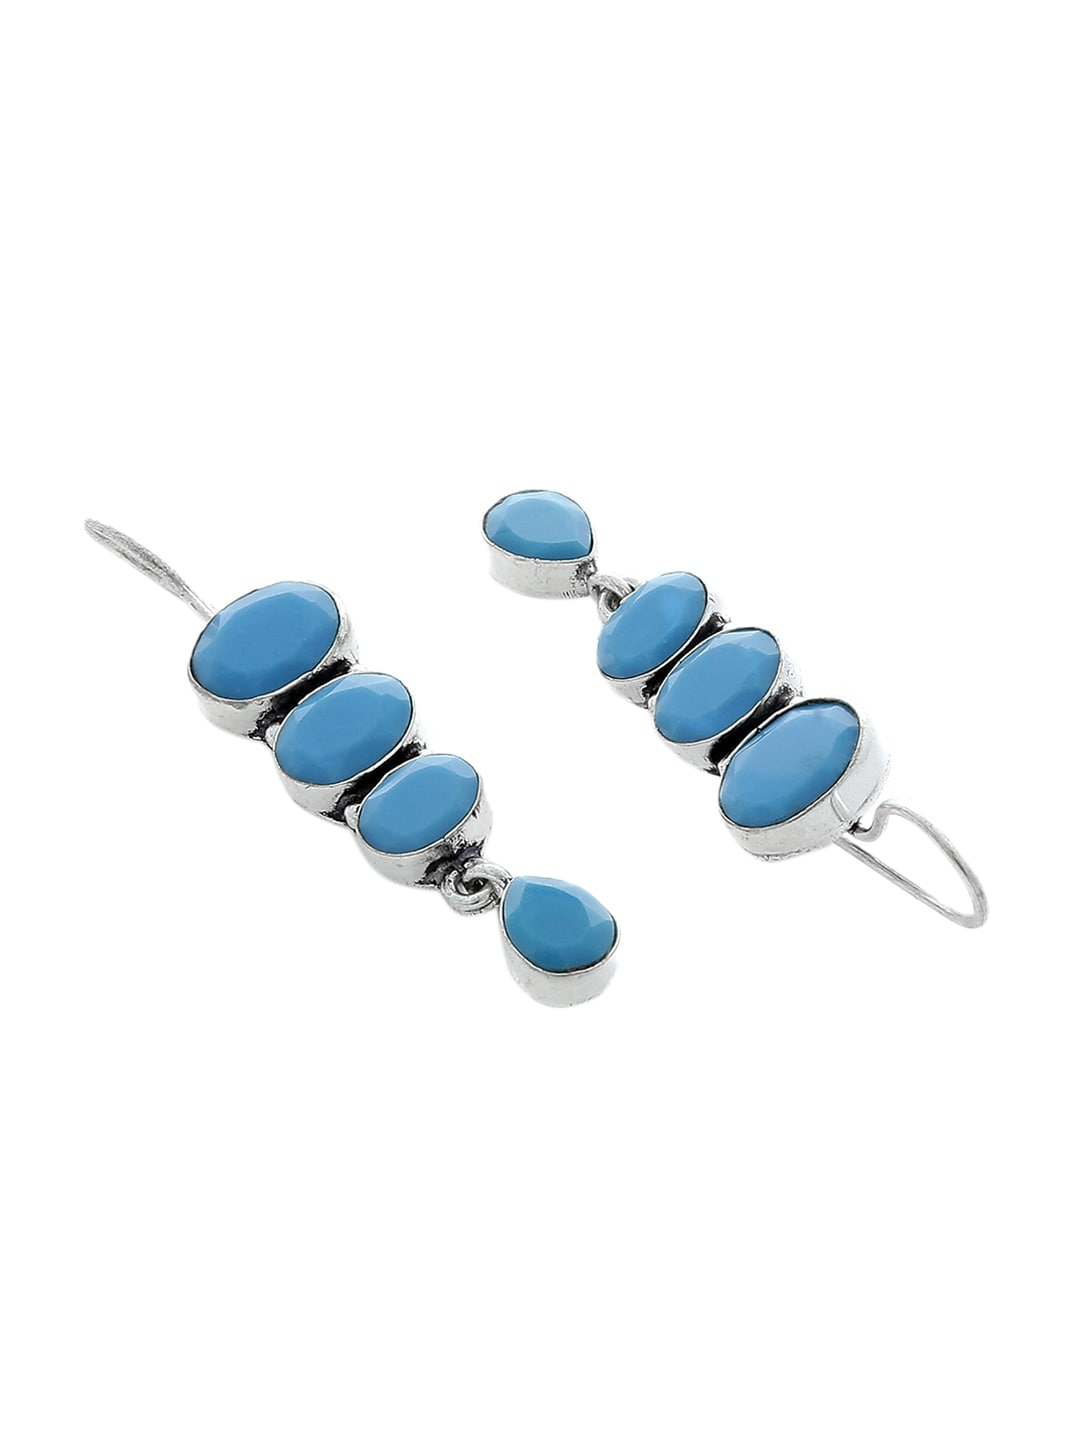 EL REGALO Blue Contemporary Stone-Studded Drop Earrings - for Women and Girls
Style ID: 16991450